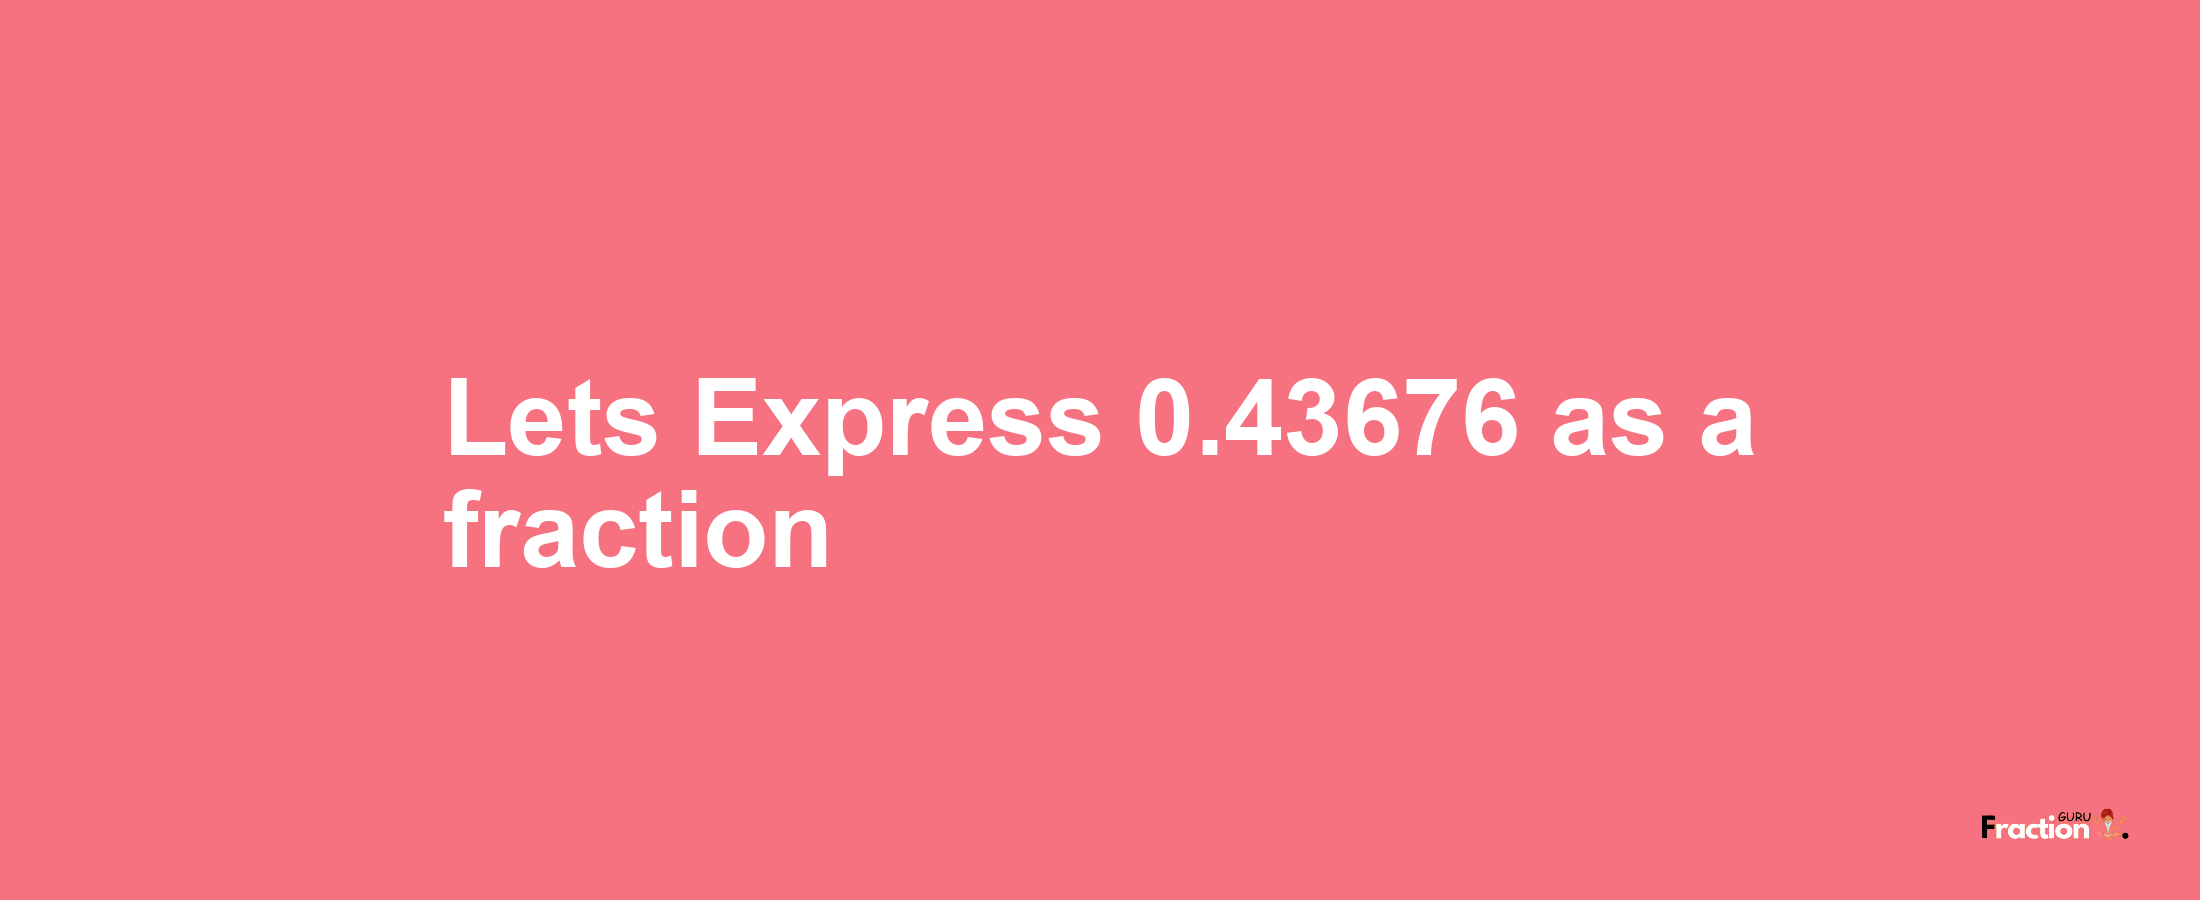 Lets Express 0.43676 as afraction